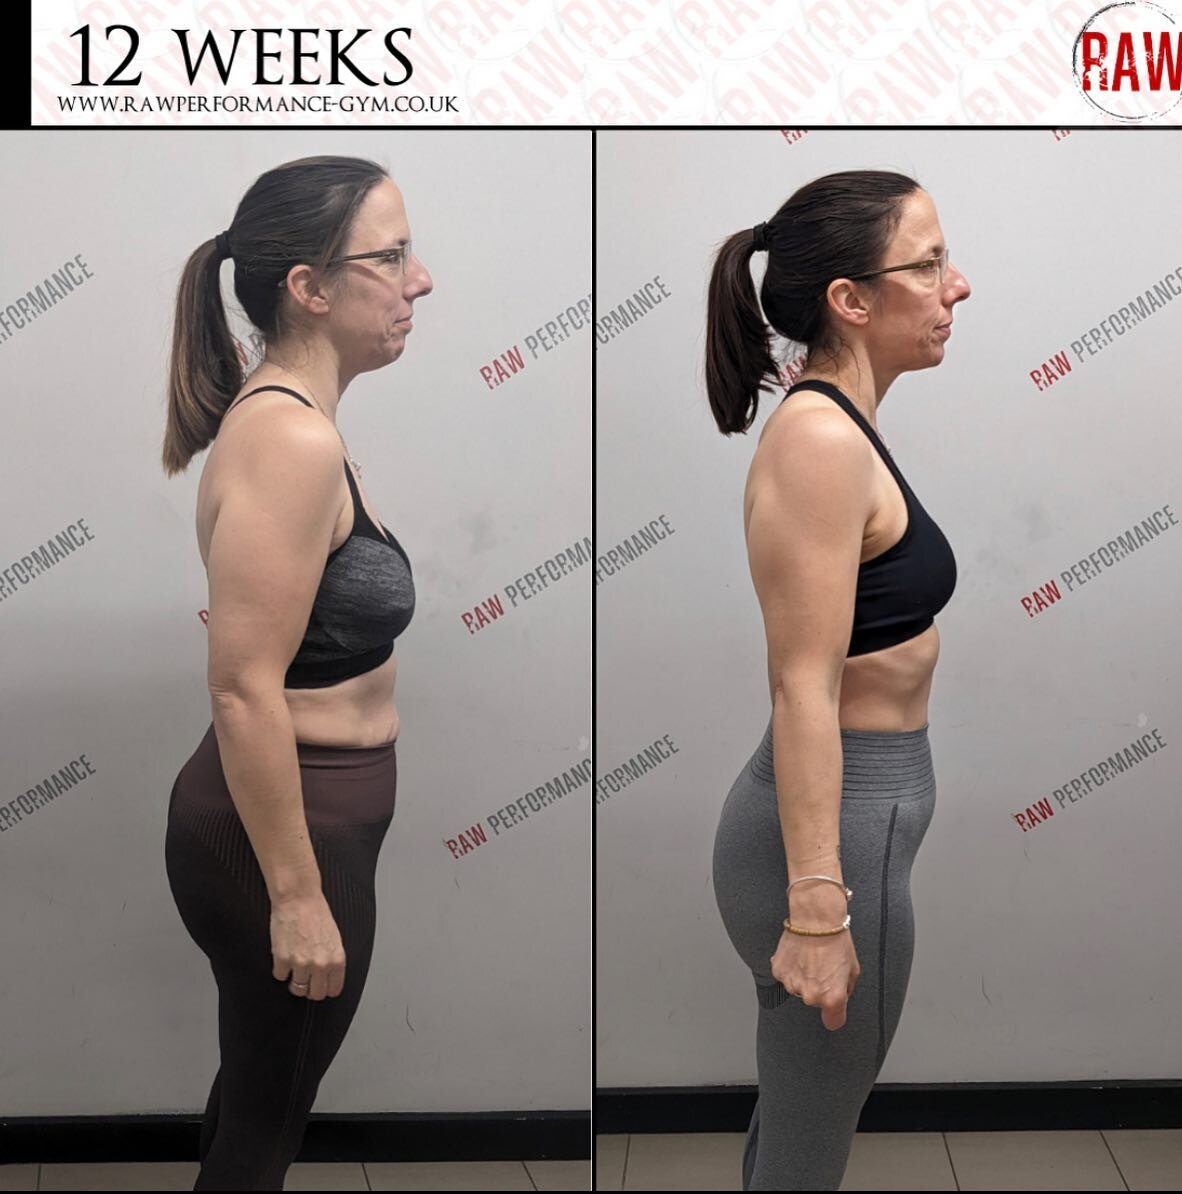 *** Kelly ***
*
A fantastic 1-2-1 12 week transformation from @kellysouthgate79 under the watchful guidance of @trendall.training
*
The old age saying of &lsquo;there are plenty of ways to skin a cat&rsquo; comes to fruition here as Charlie&rsquo;s a